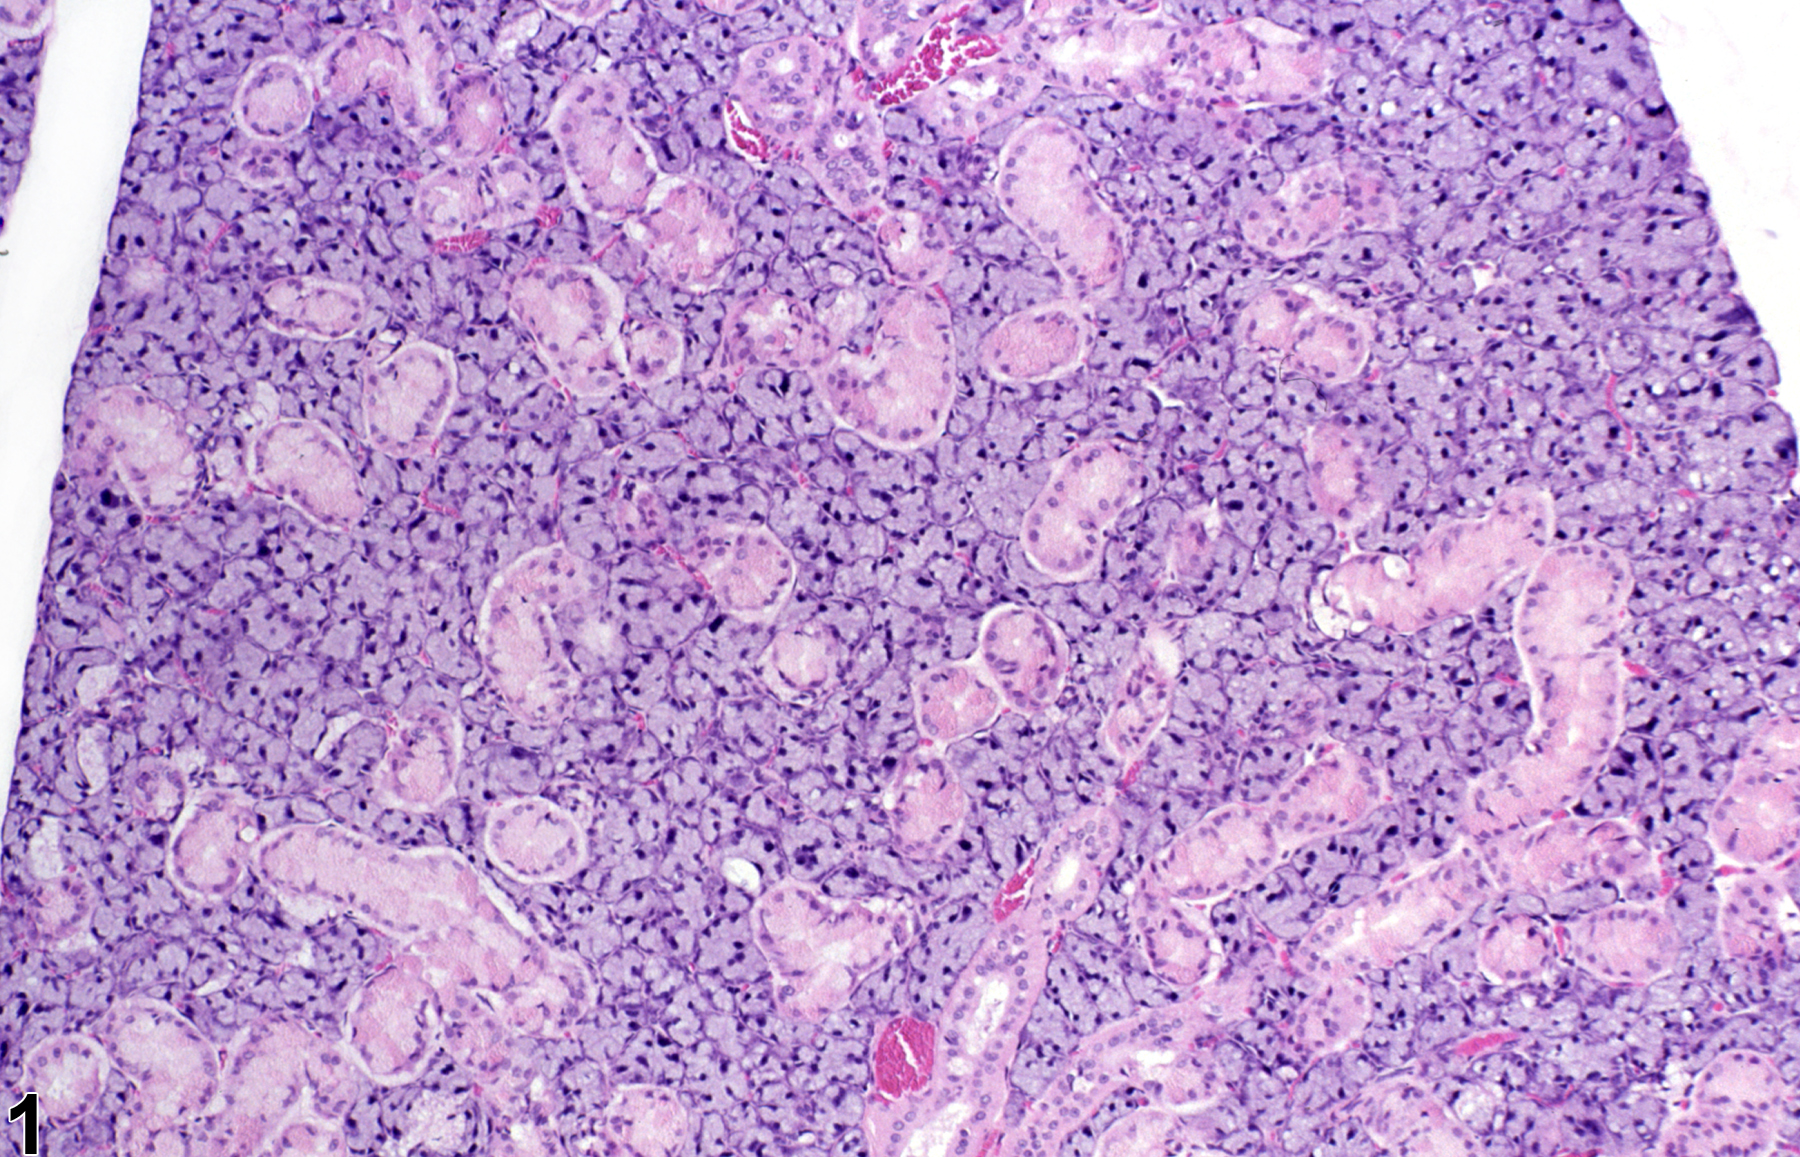 Image of normal comparison to hyperplasia in the salivary gland from a male F344/N rat in a subchronic study